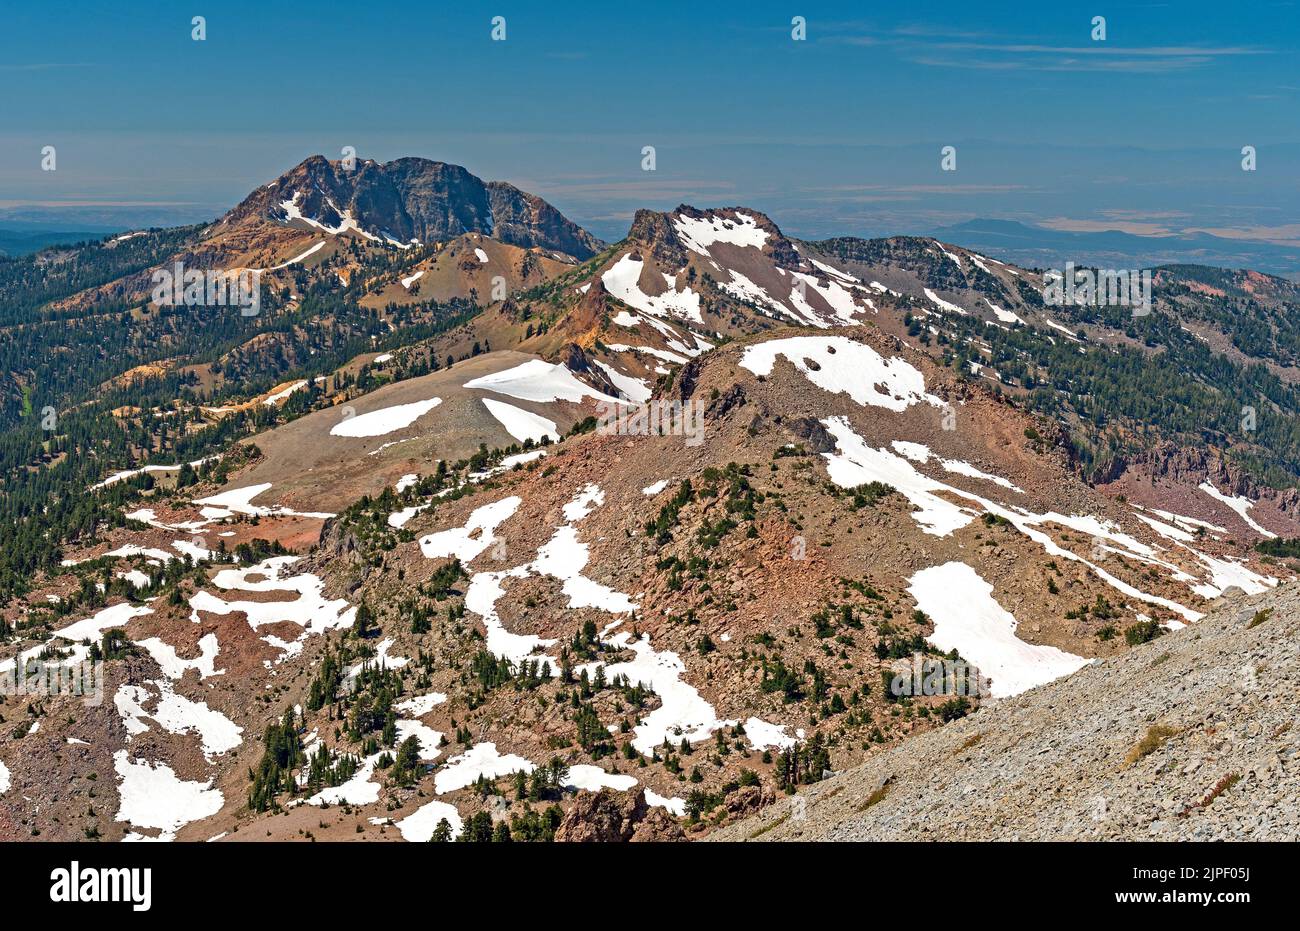 Volcanic Landscape Viewed From the Top of a Volcano on Mt Lassen in California Stock Photo